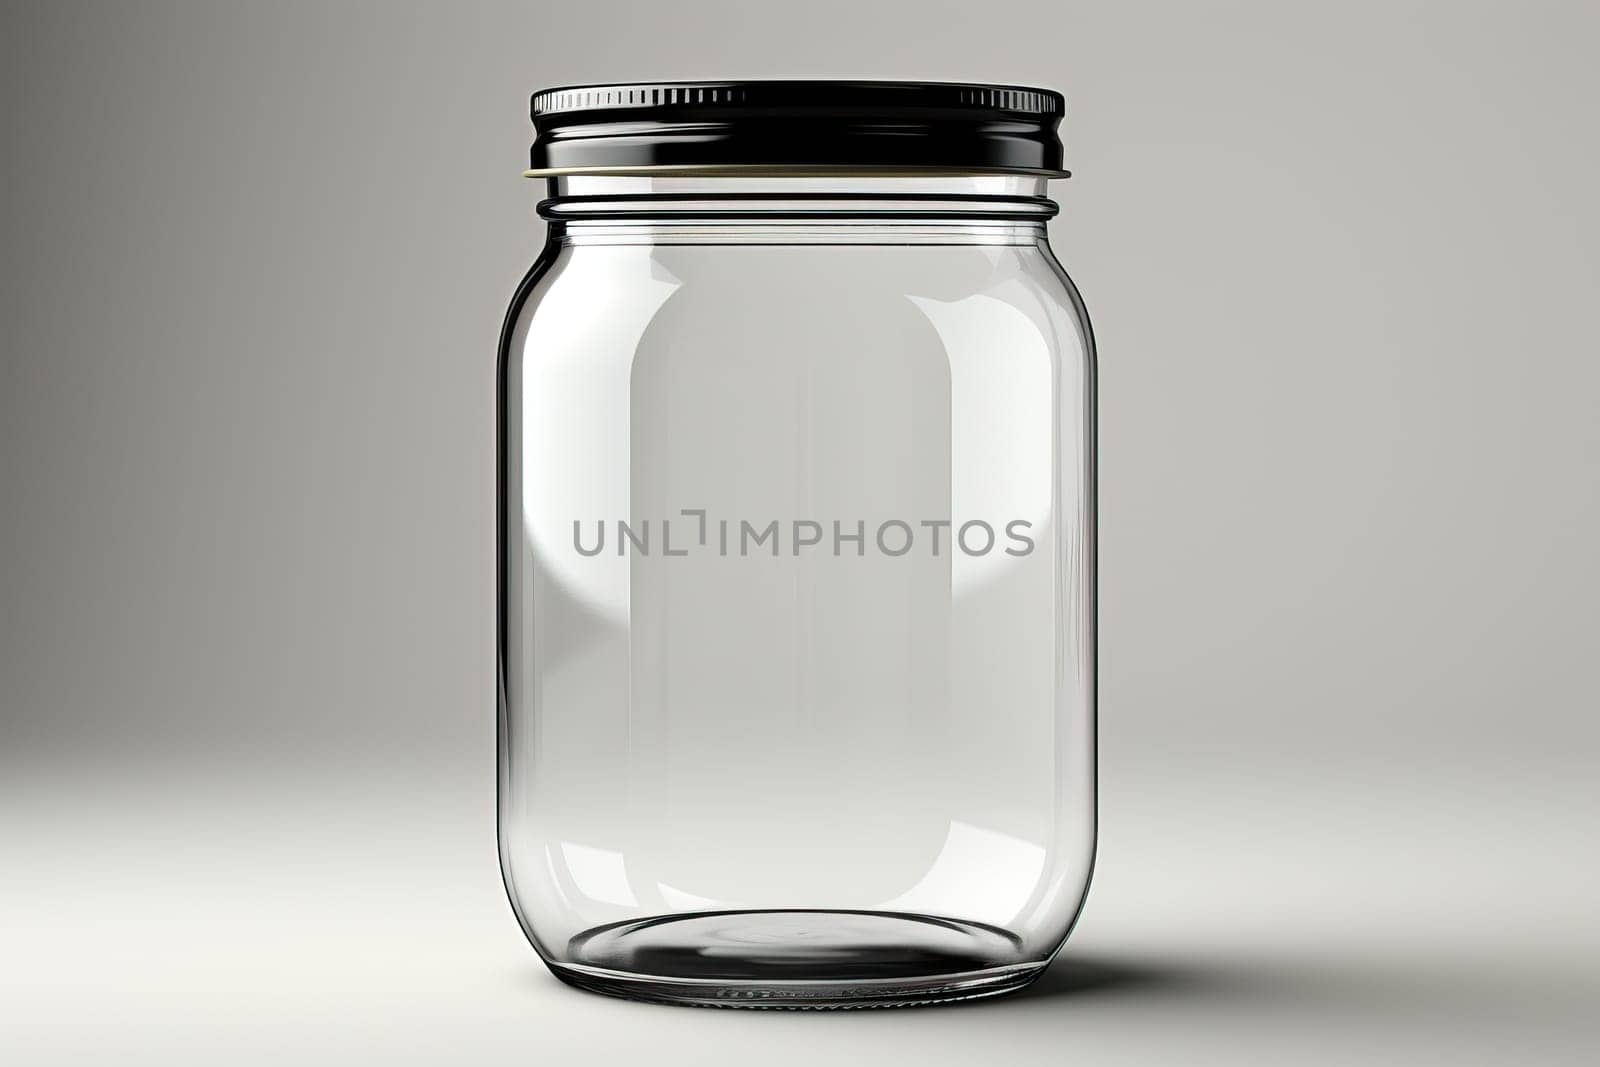 A glass jar with a screw-on lid on a gray background.